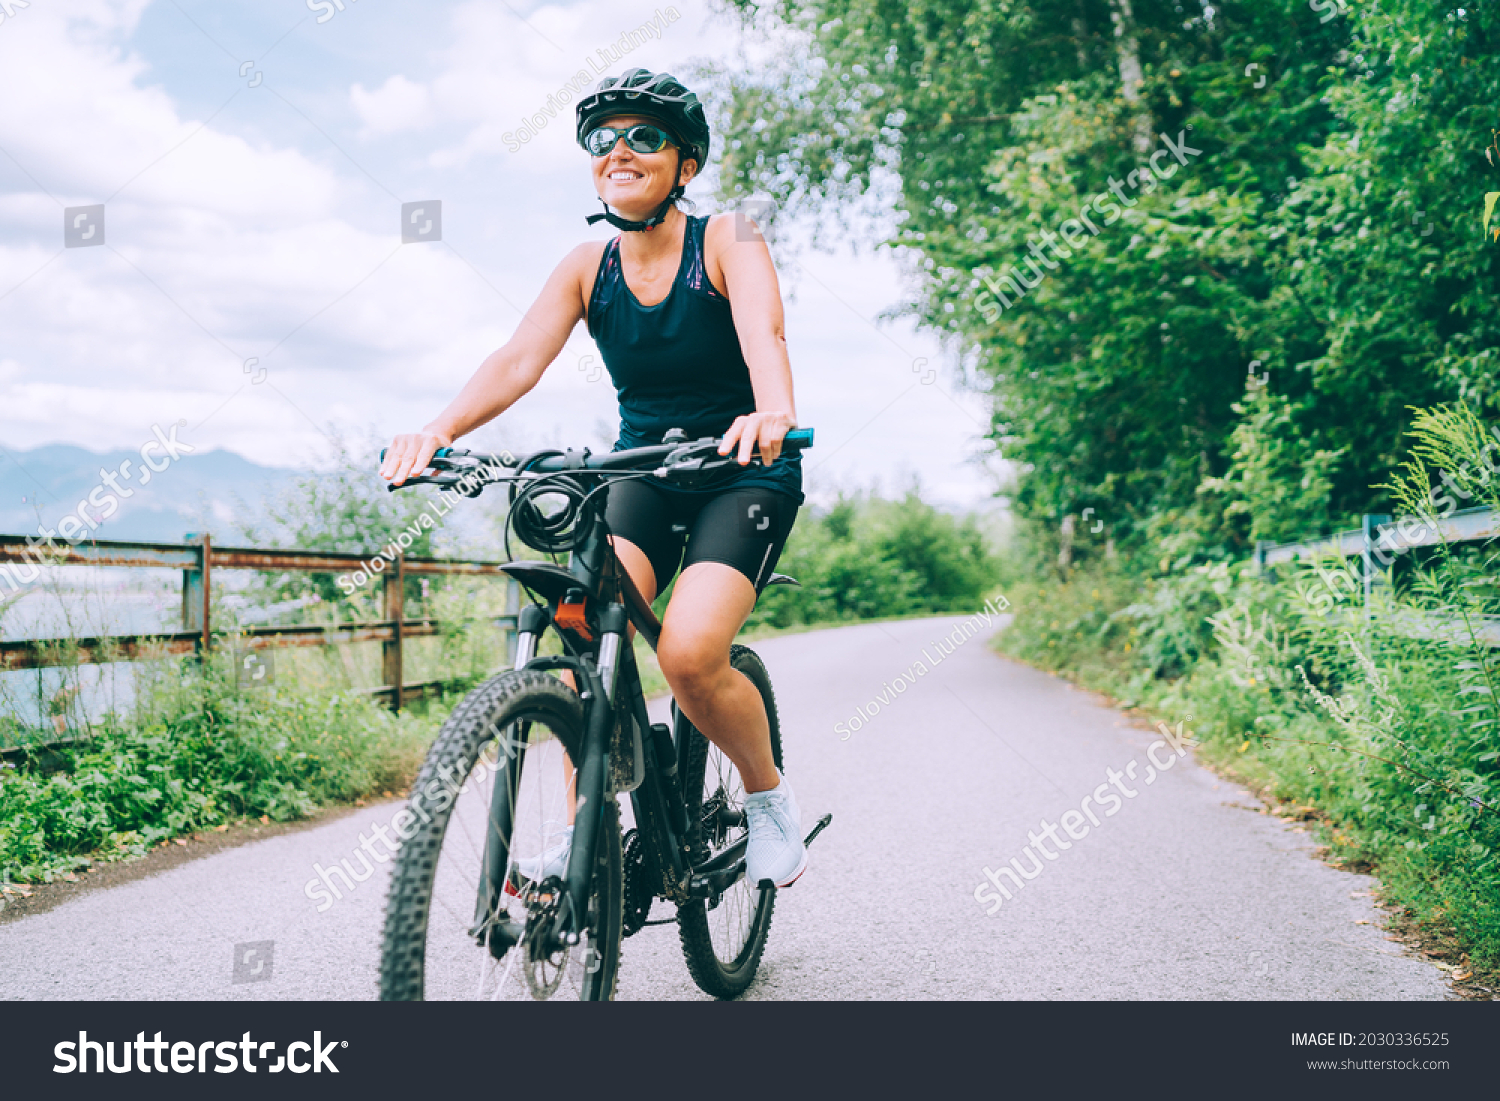 Portrait of a happy smiling woman dressed in cycling clothes, helmet and sunglasses riding a bicycle on the asphalt out-of-town bicycle path. Active sporty people concept image. #2030336525